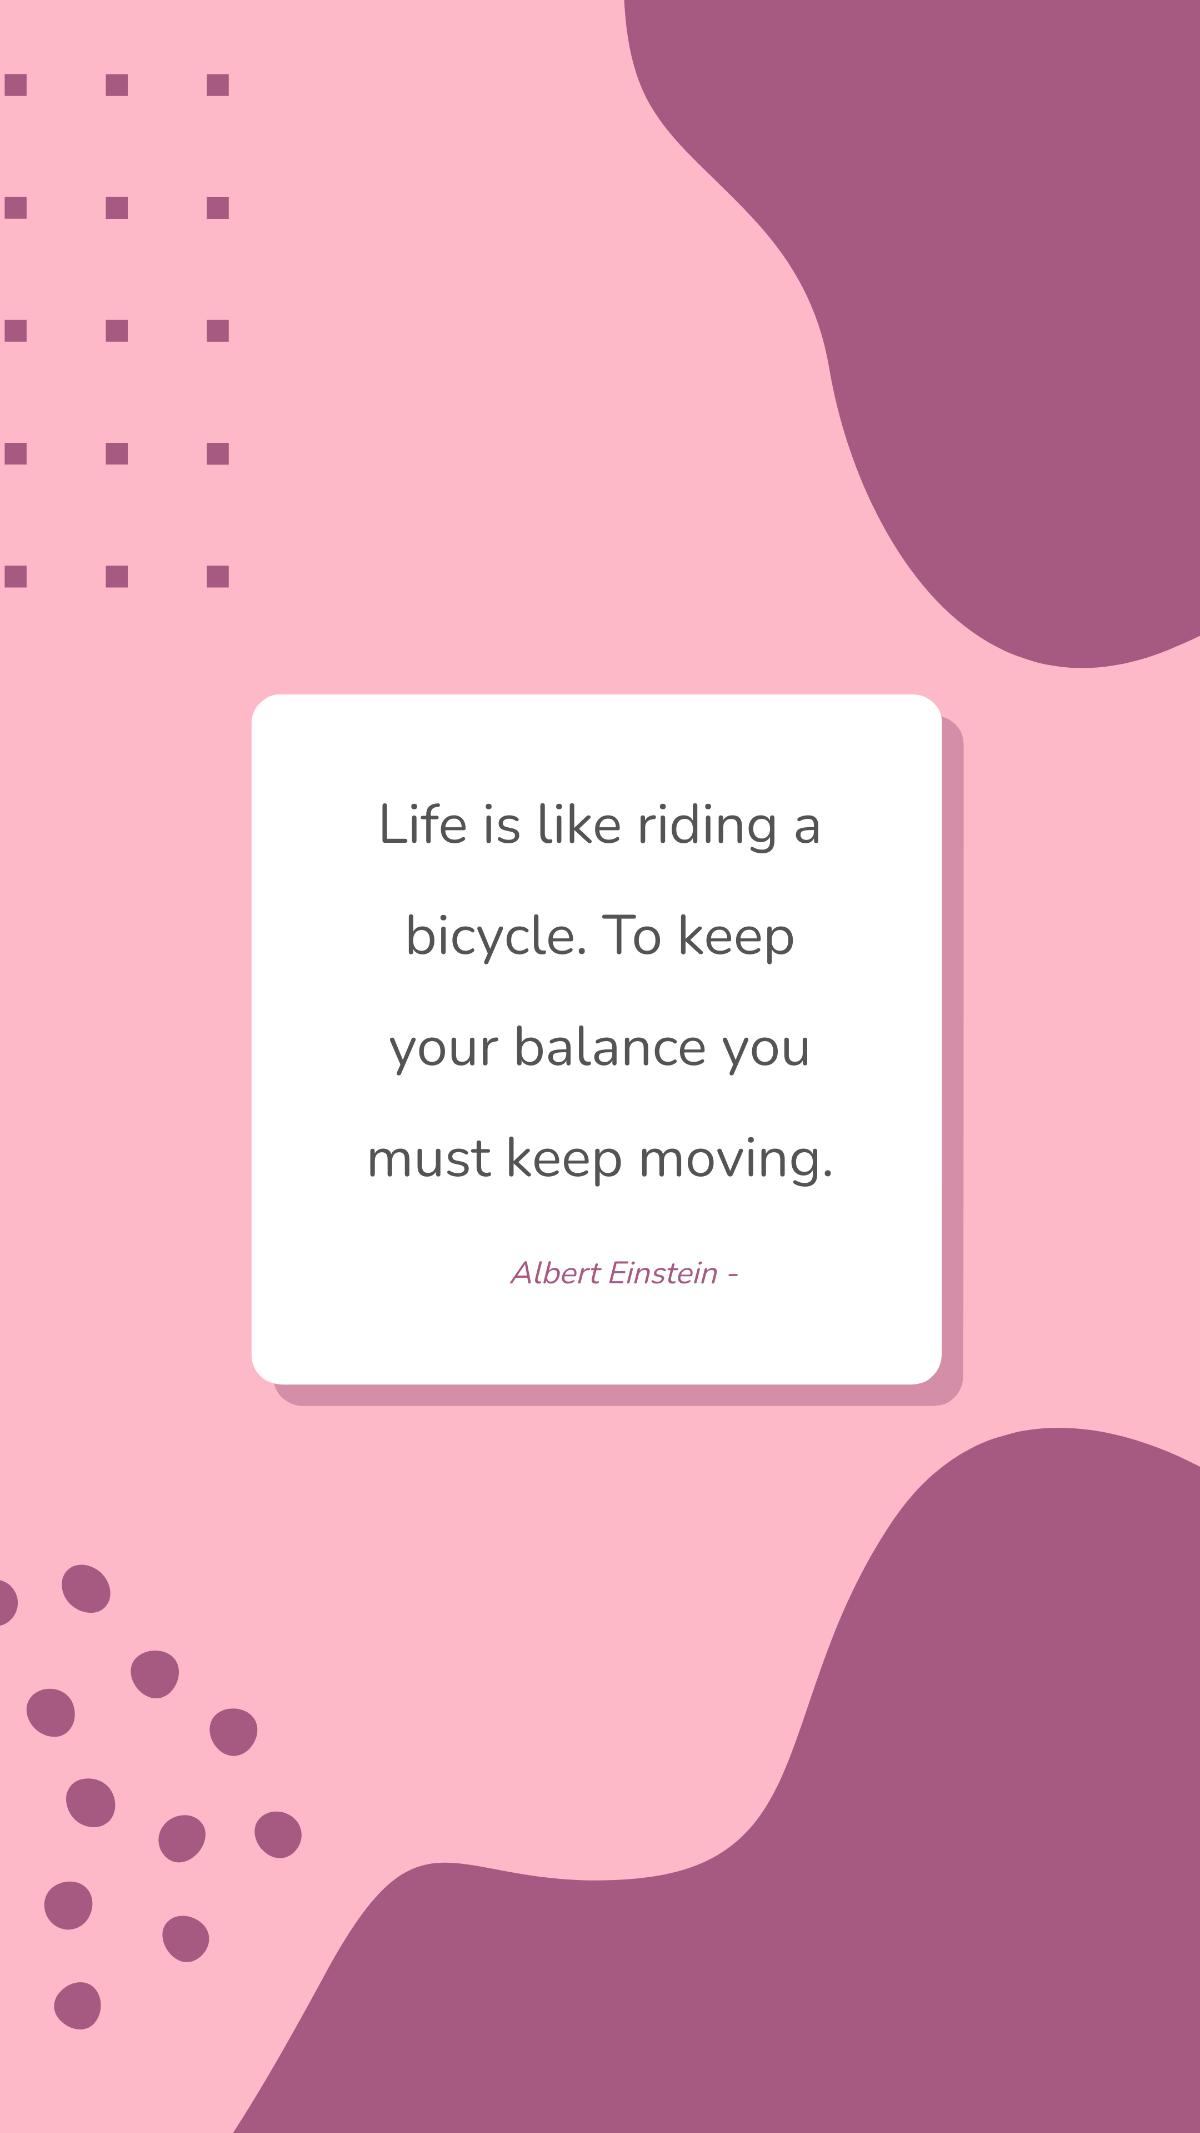 Albert Einstein - Life is like riding a bicycle. To keep your balance you must keep moving. Template